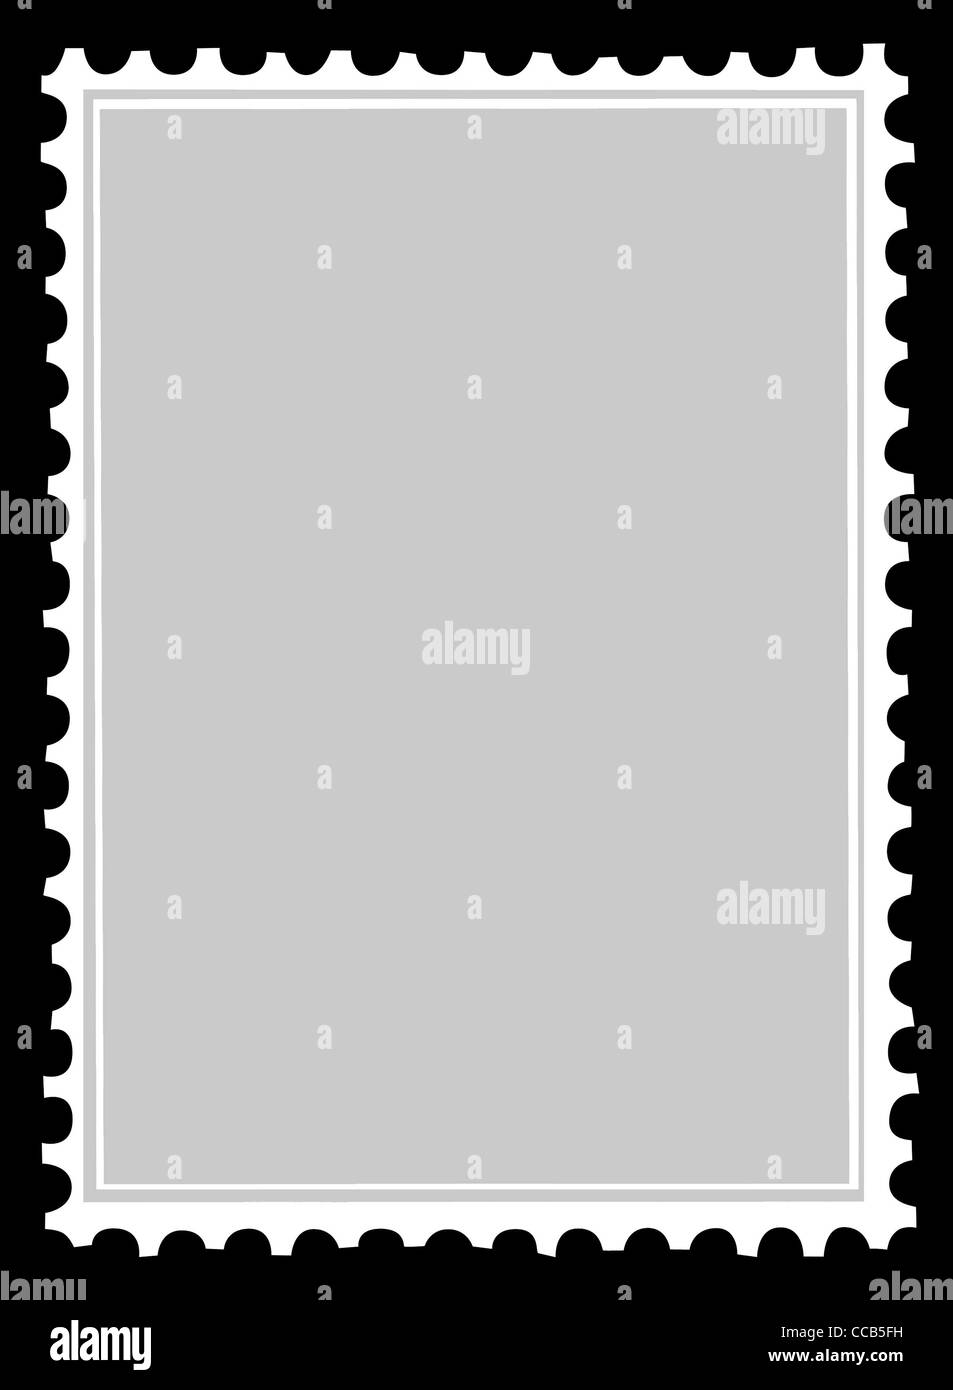 vector postage stamps Stock Photo